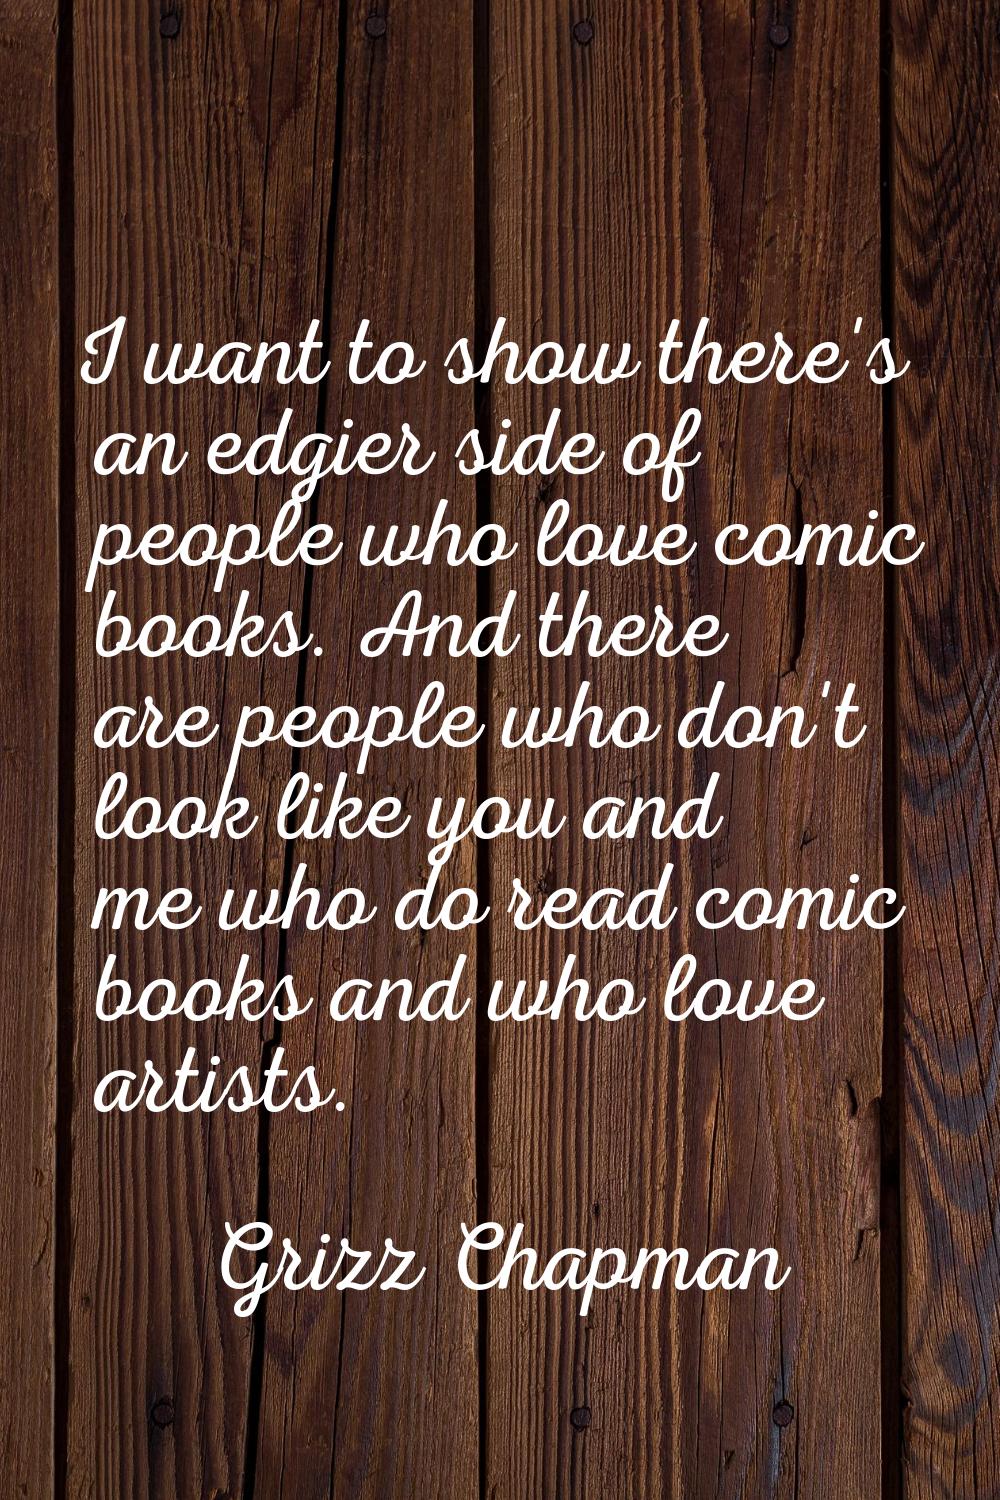 I want to show there's an edgier side of people who love comic books. And there are people who don'